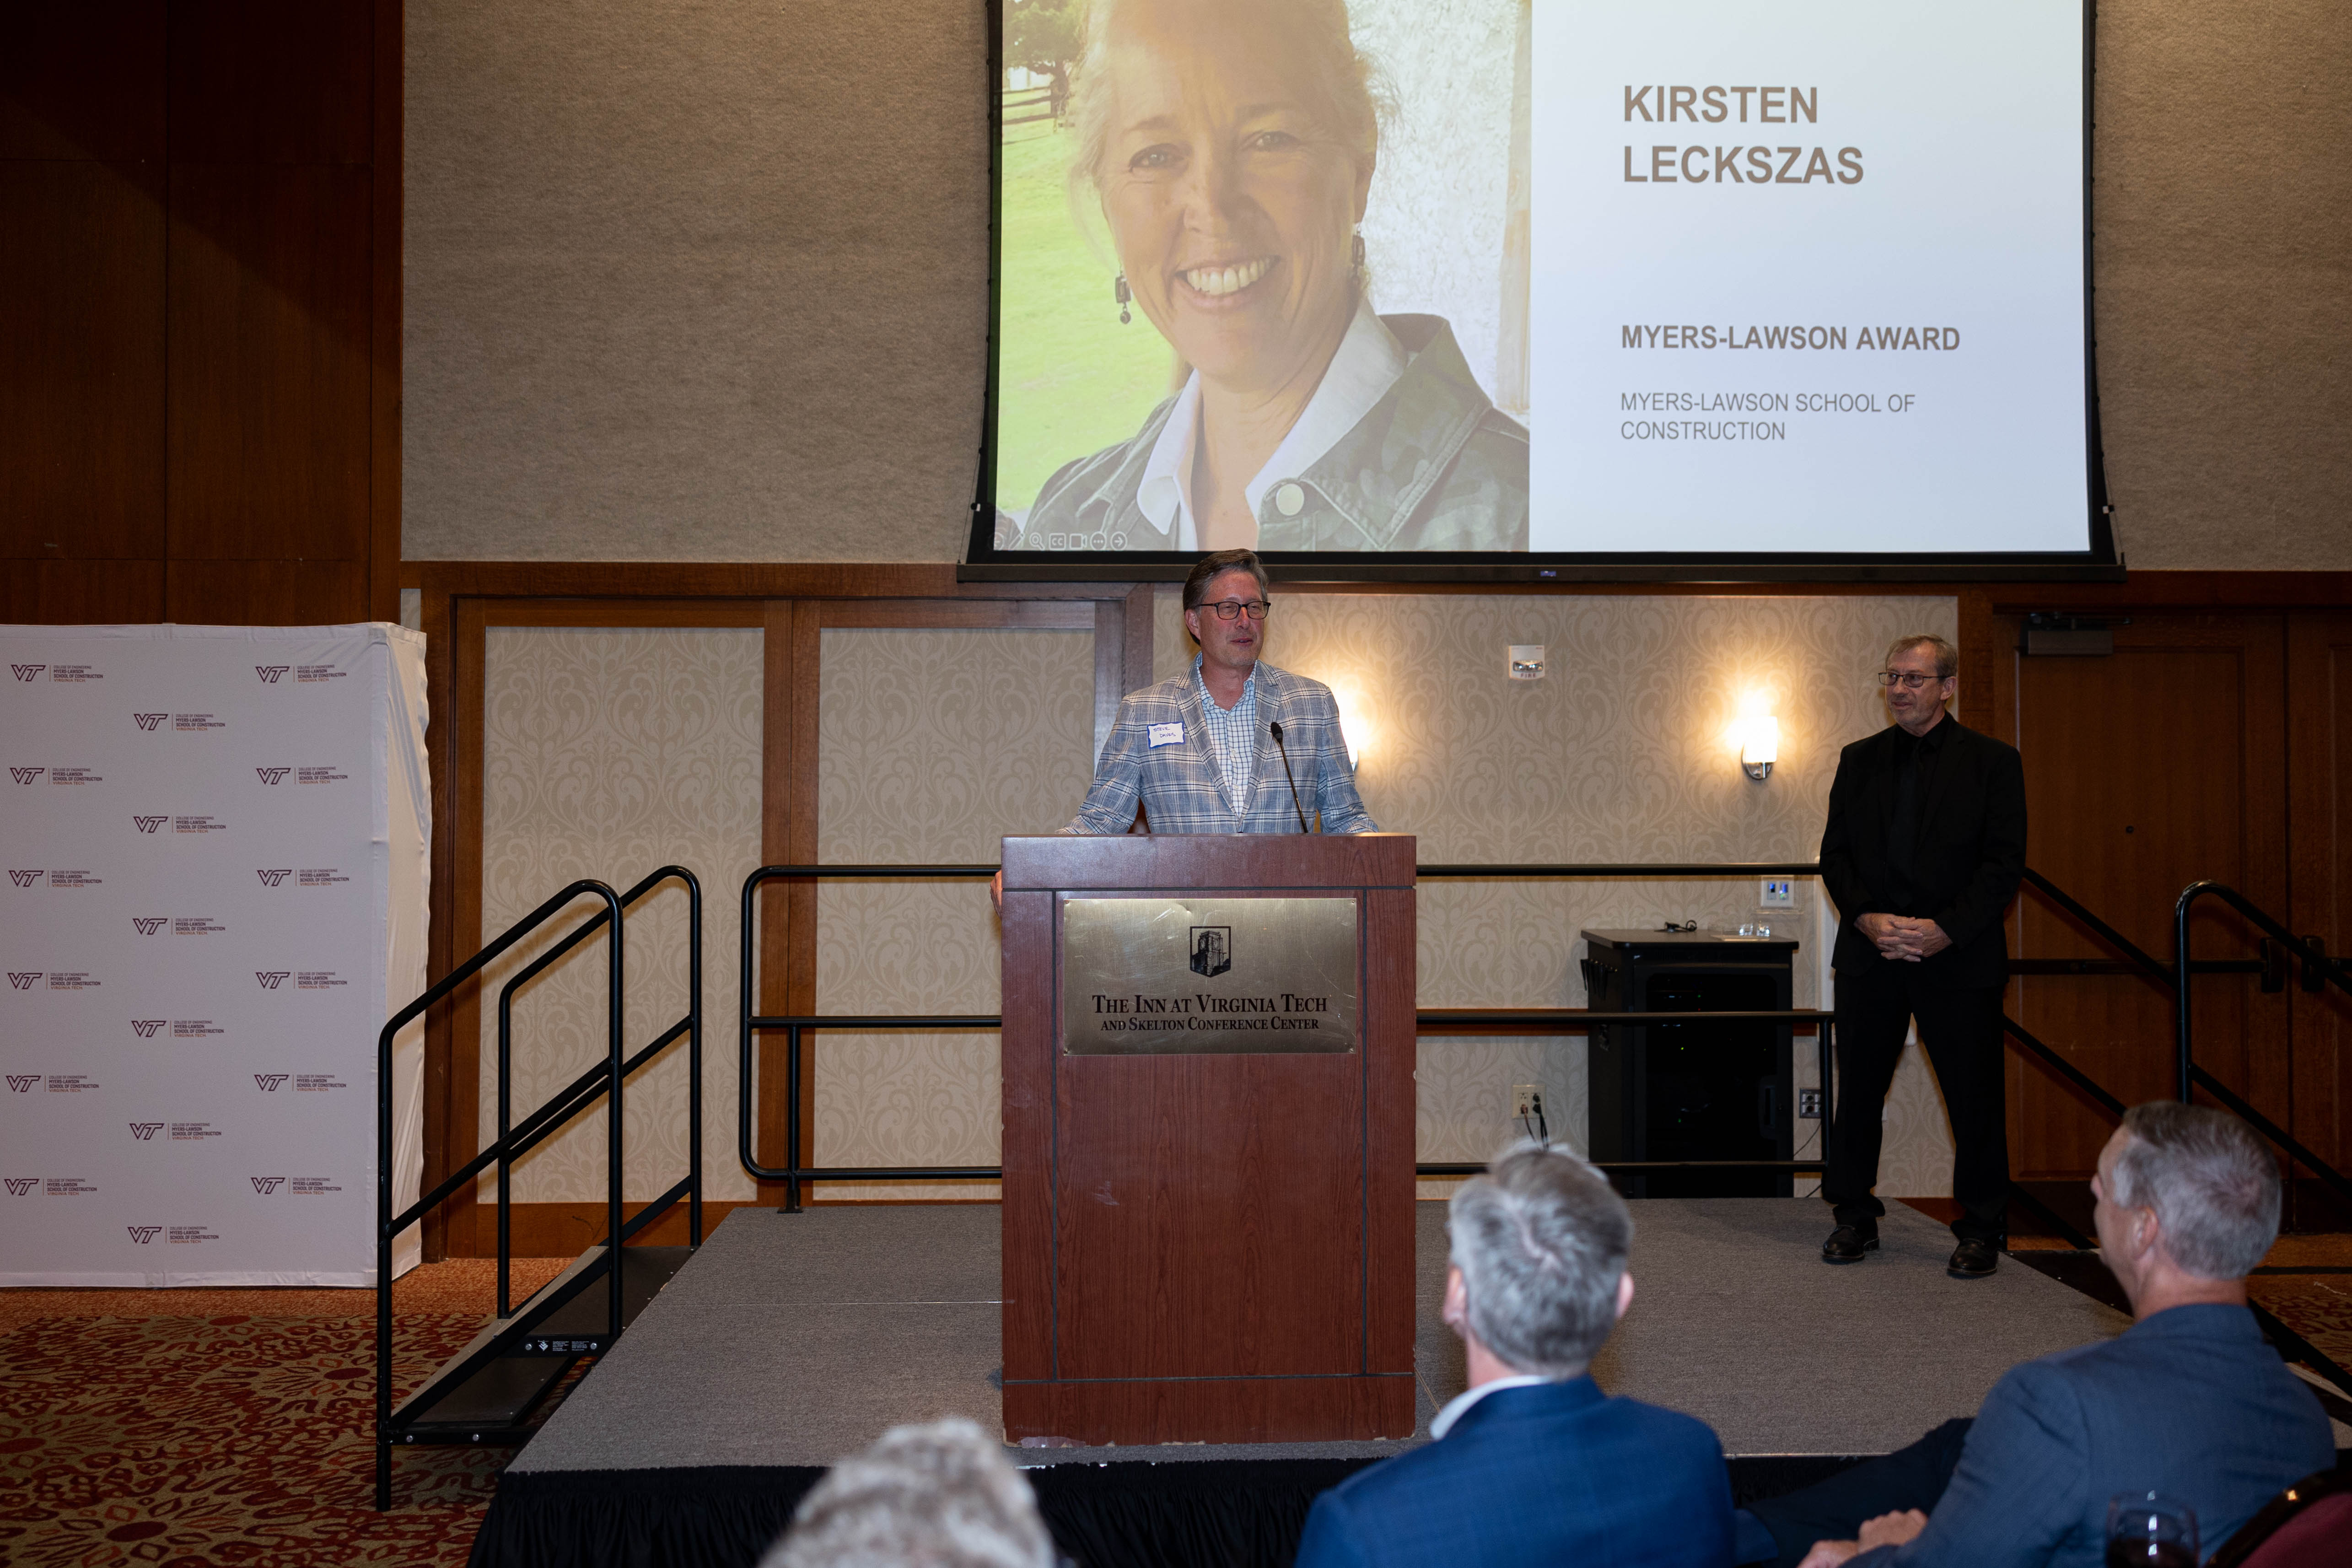 Steve Daves '89 presents Kirsten Leckszas '88 with the Myers-Lawson Award.